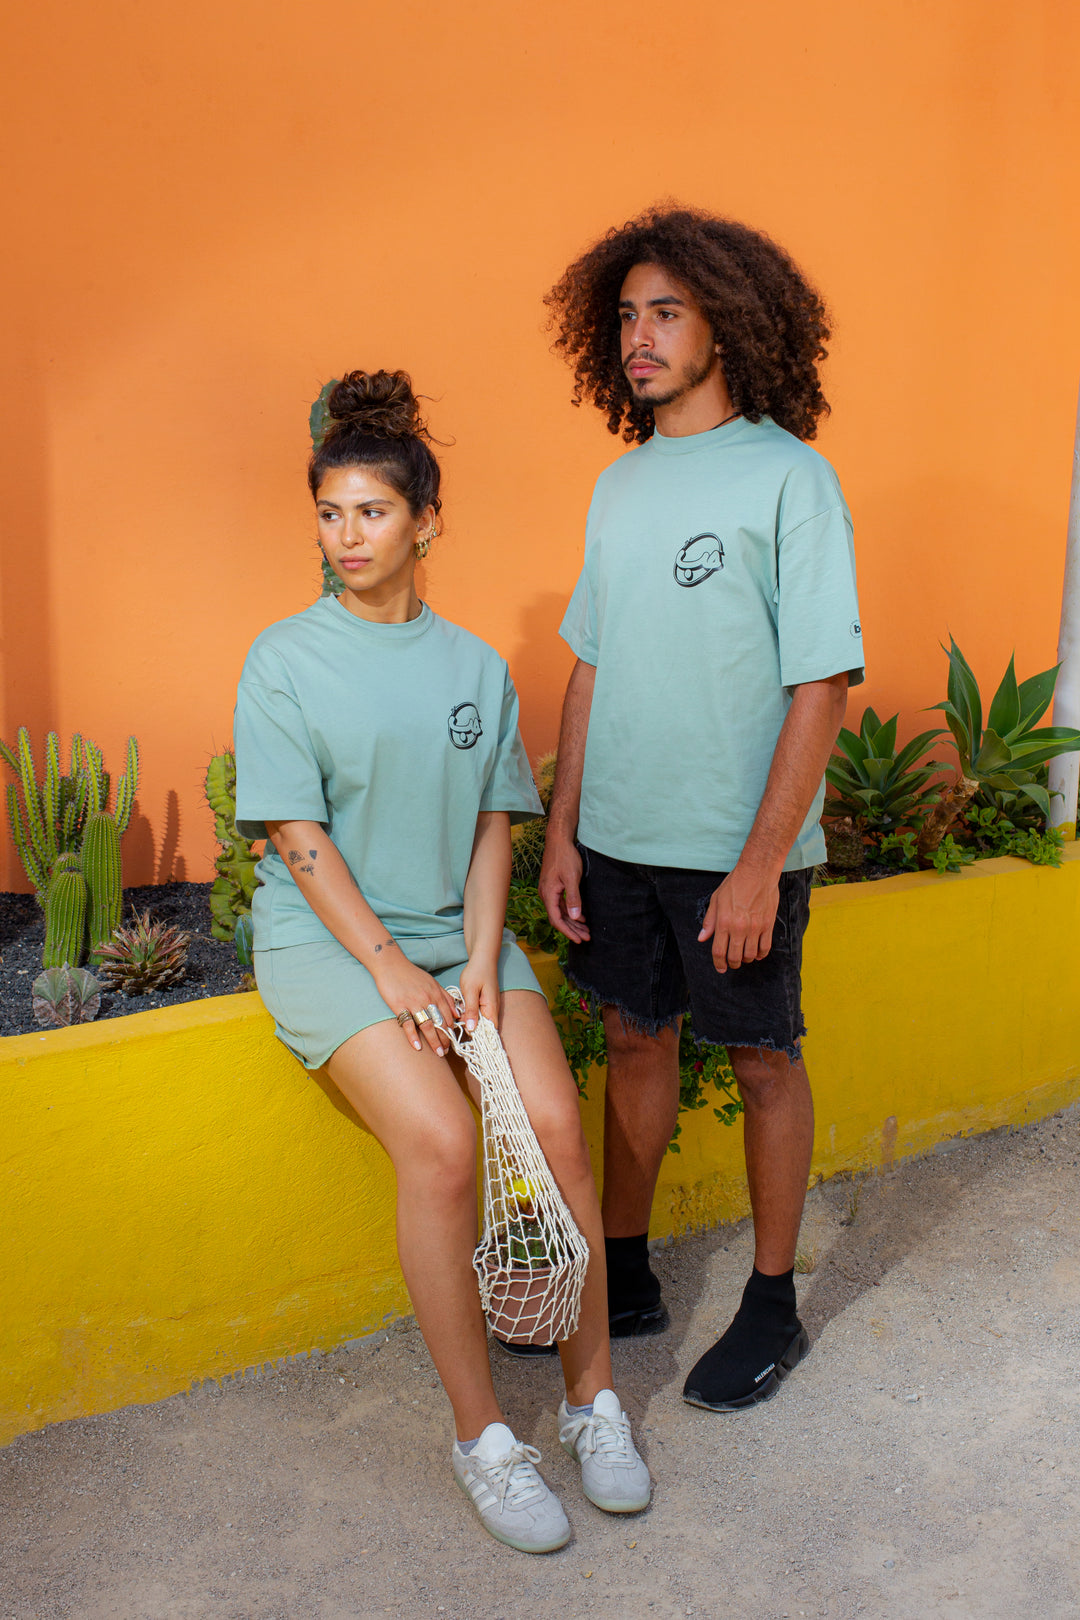 Young adult male and female wearing an Oversized mint T-shirt with Kell el Hobb written in Arabic كل الحب and printed in black silkscreen. They are both in front of an orange wall. She is wearing the T-shirt along with a mint short, grey sneakers and holding a pot with a cactus in a net. He is standing next to her wearing the T-shirt with black jeans short and black running shoes.